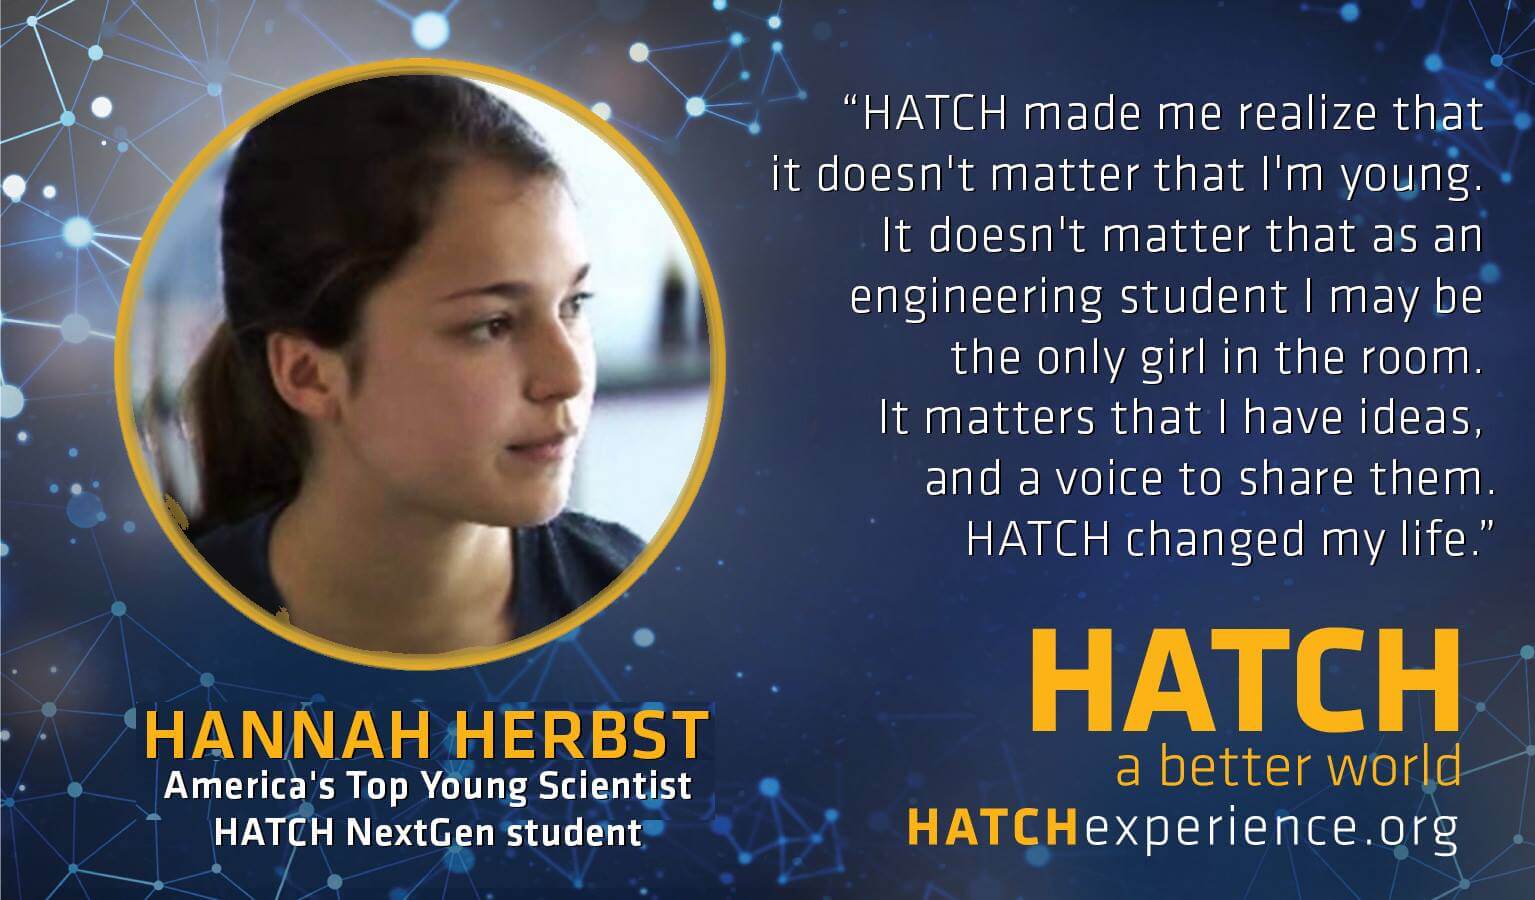 #becauseofHATCH: Hannah Herbst shares her life changing experience at HATCH